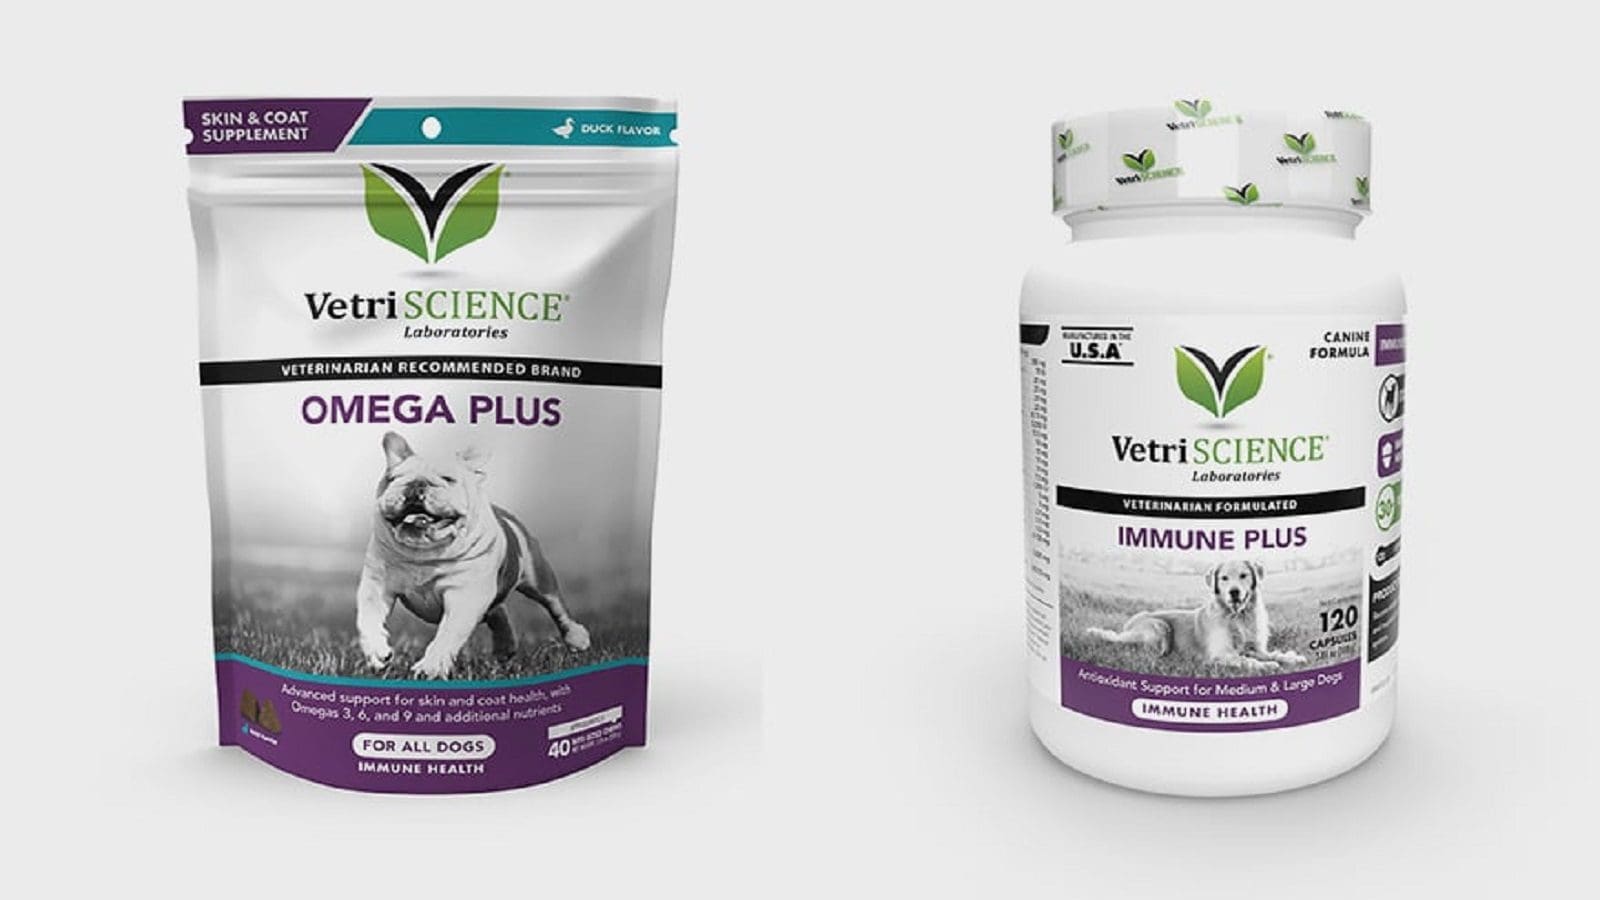 American VetriScience improves anti-allergy capabilities with new dog supplements launch